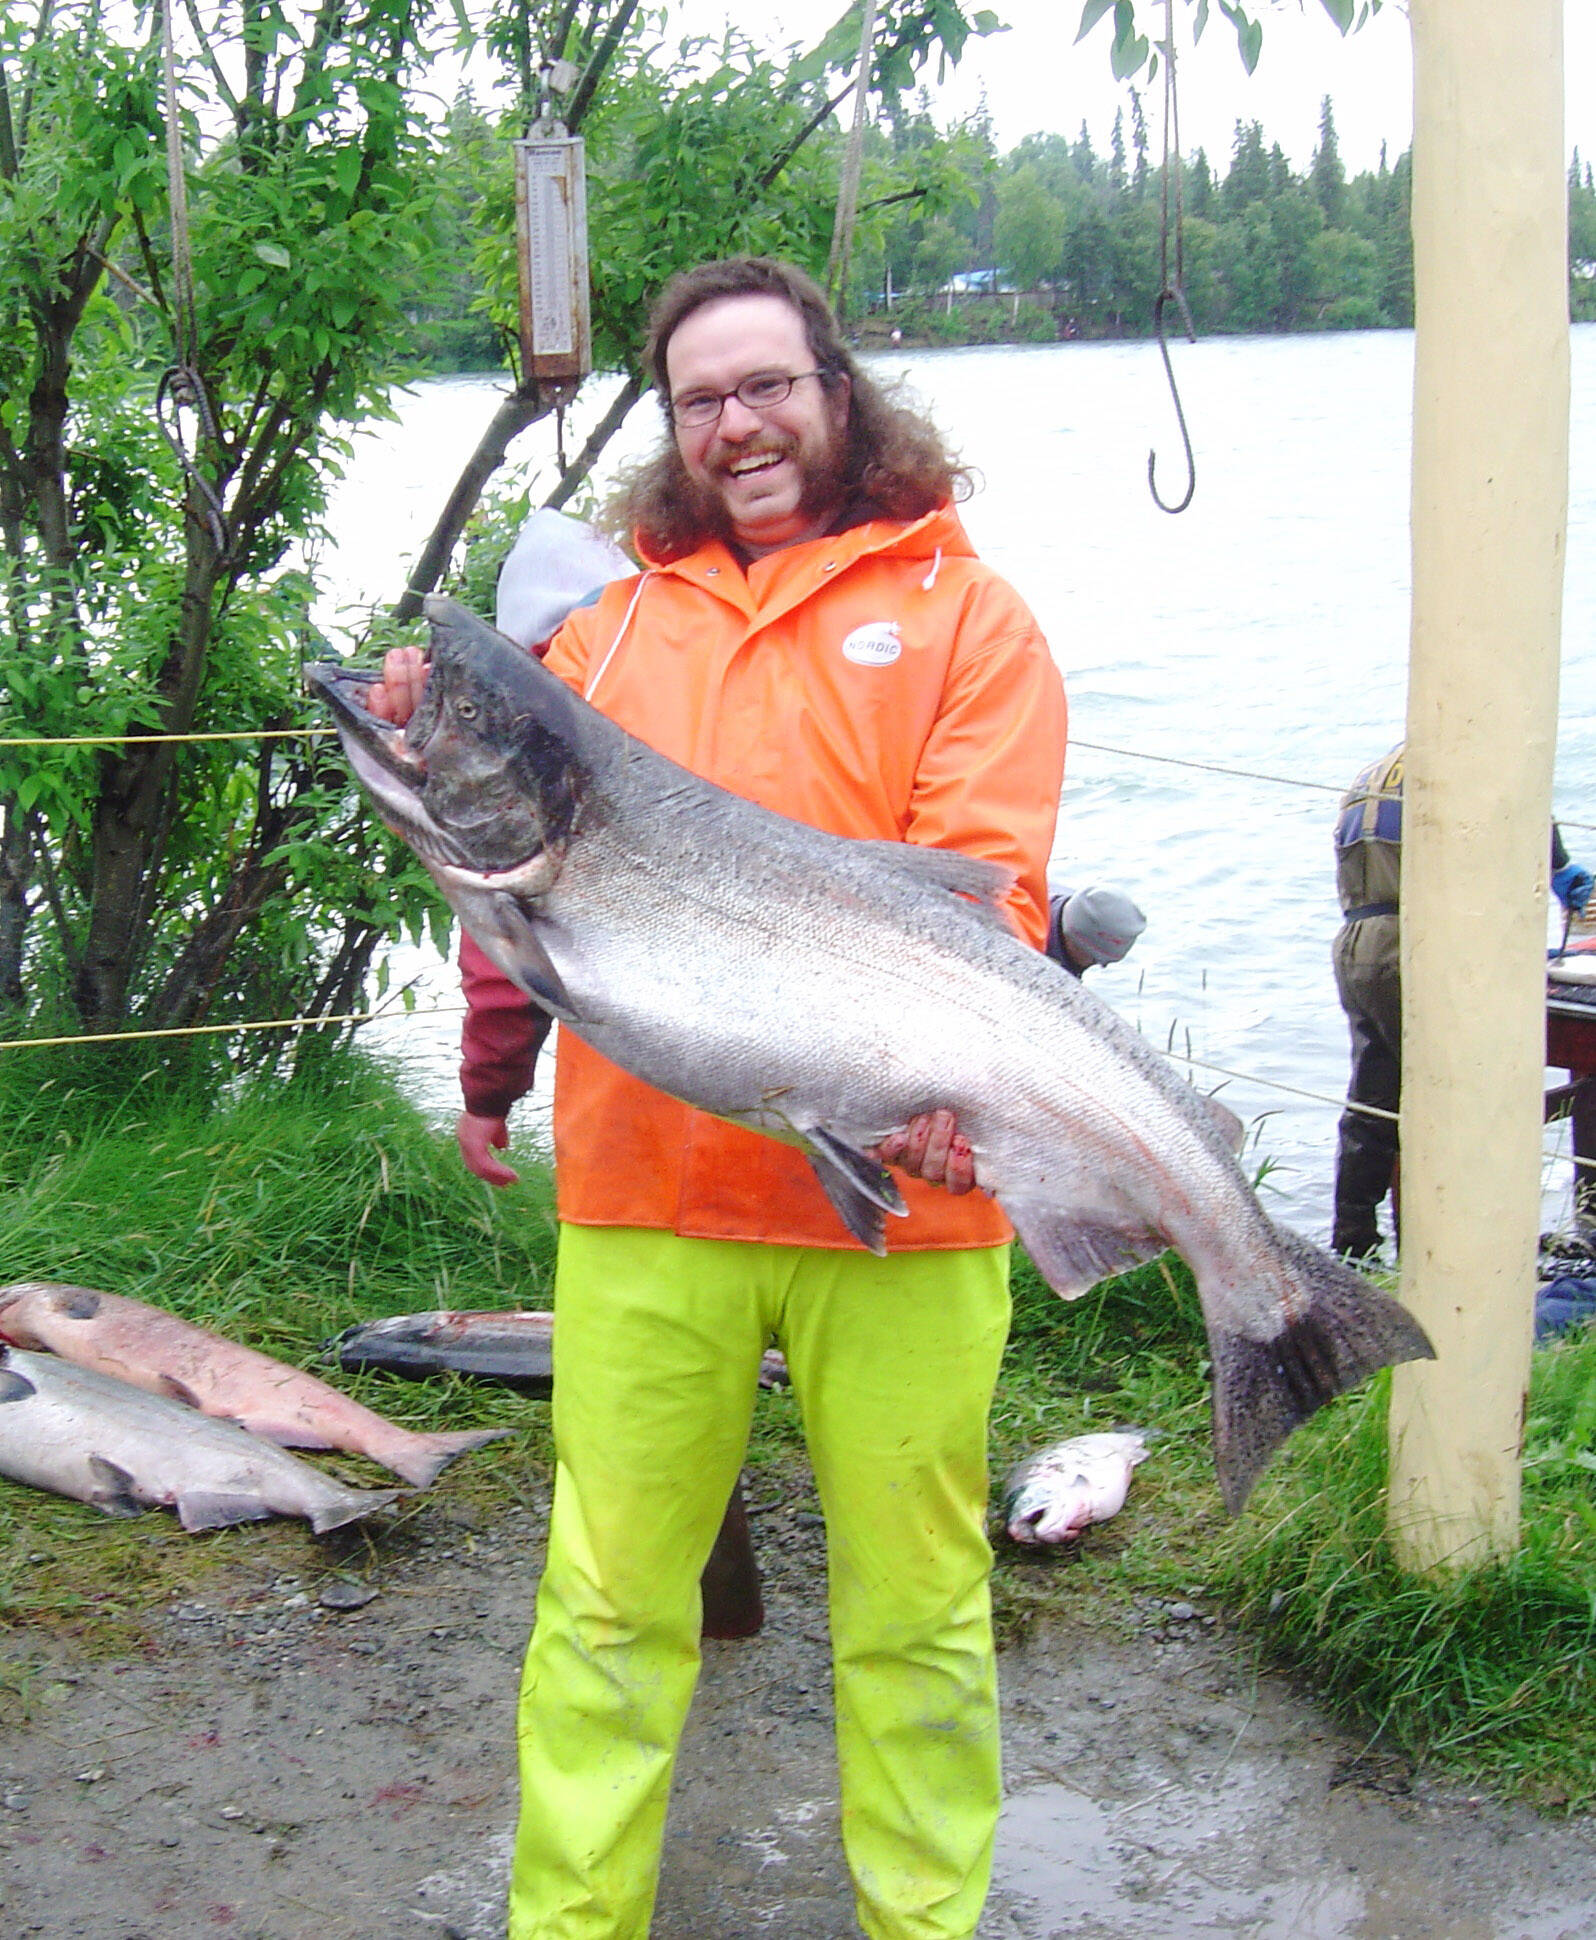 Some great examples of genetic diversity with Kenai River king salmon populations. (Photo by Ken Gates)